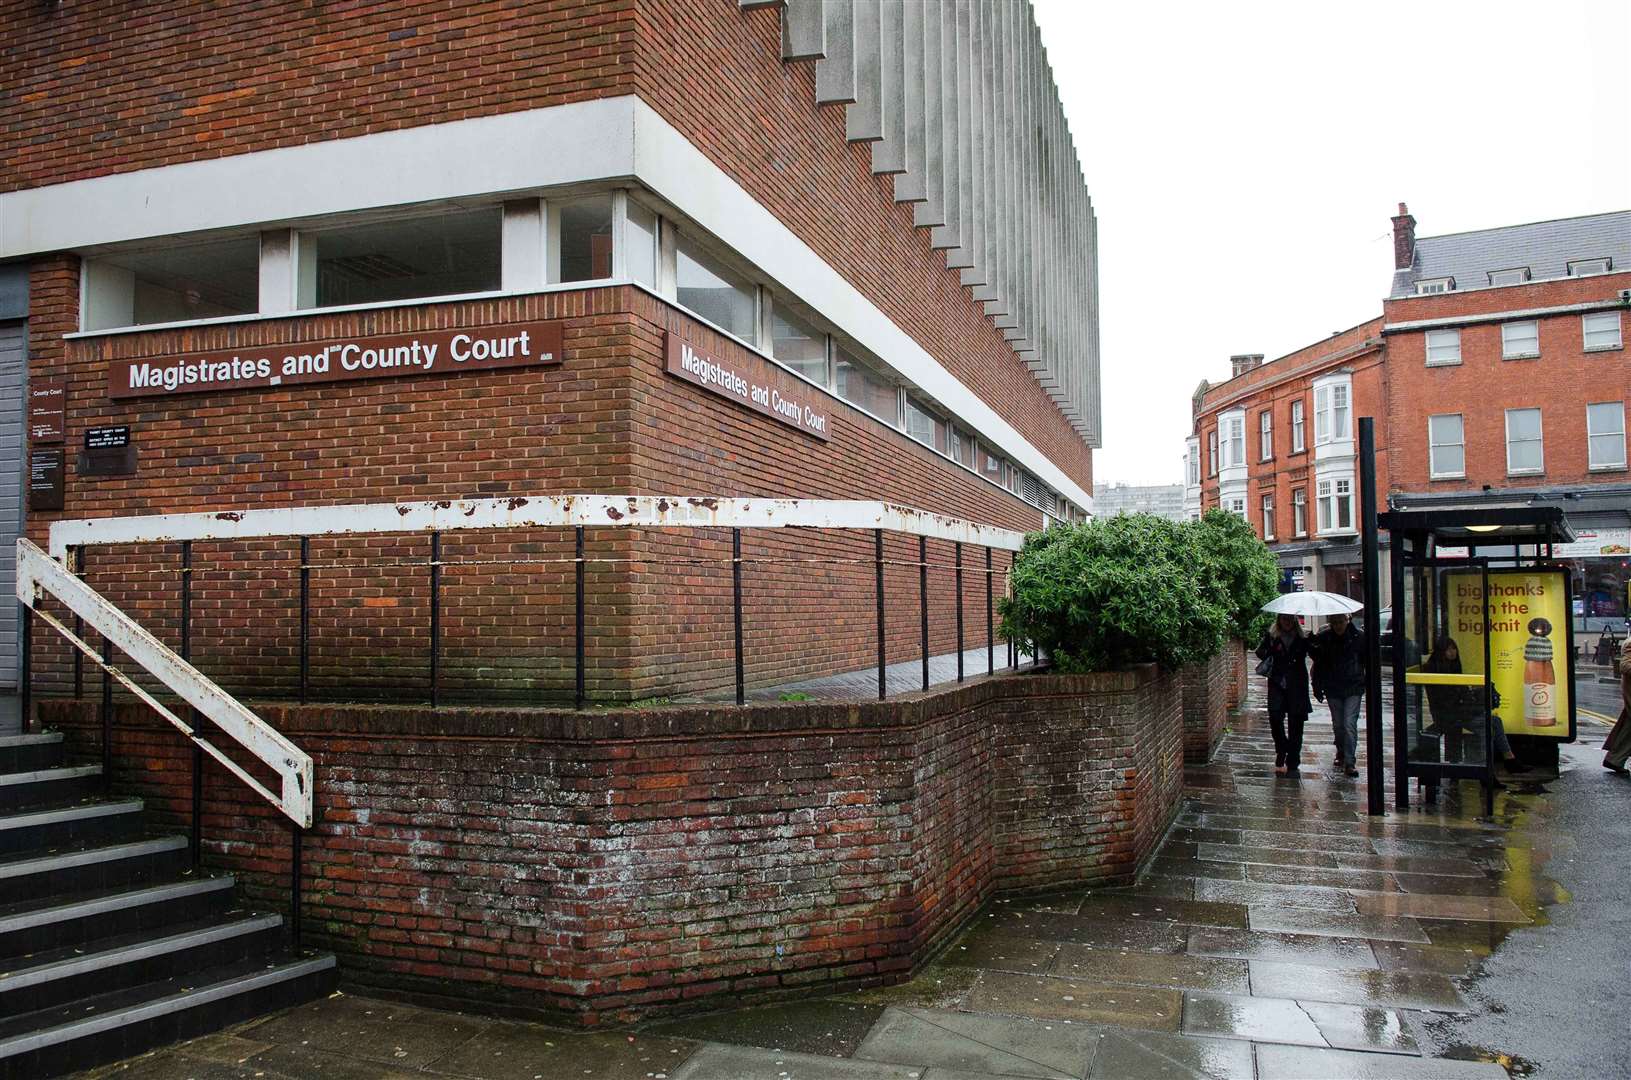 A hearing took place at Margate Magistrates' Court where Mr Ali challenged the licence revoke